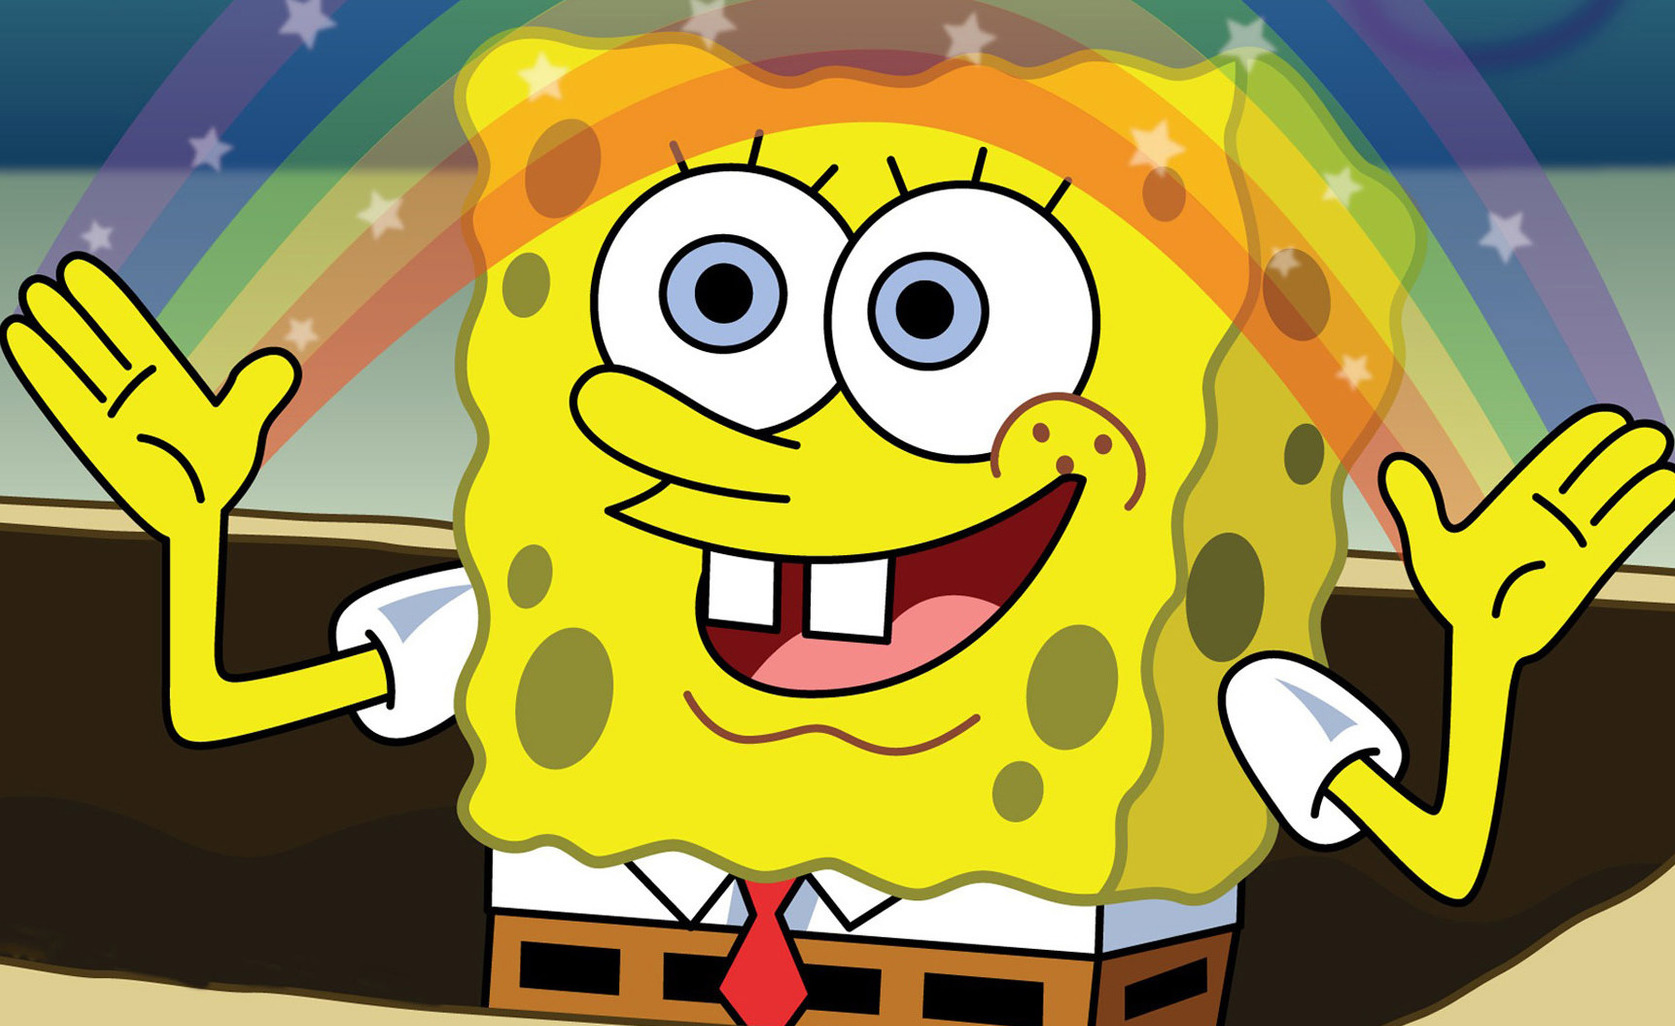 Spongebob holds up his hands; a rainbow arches between his palms.